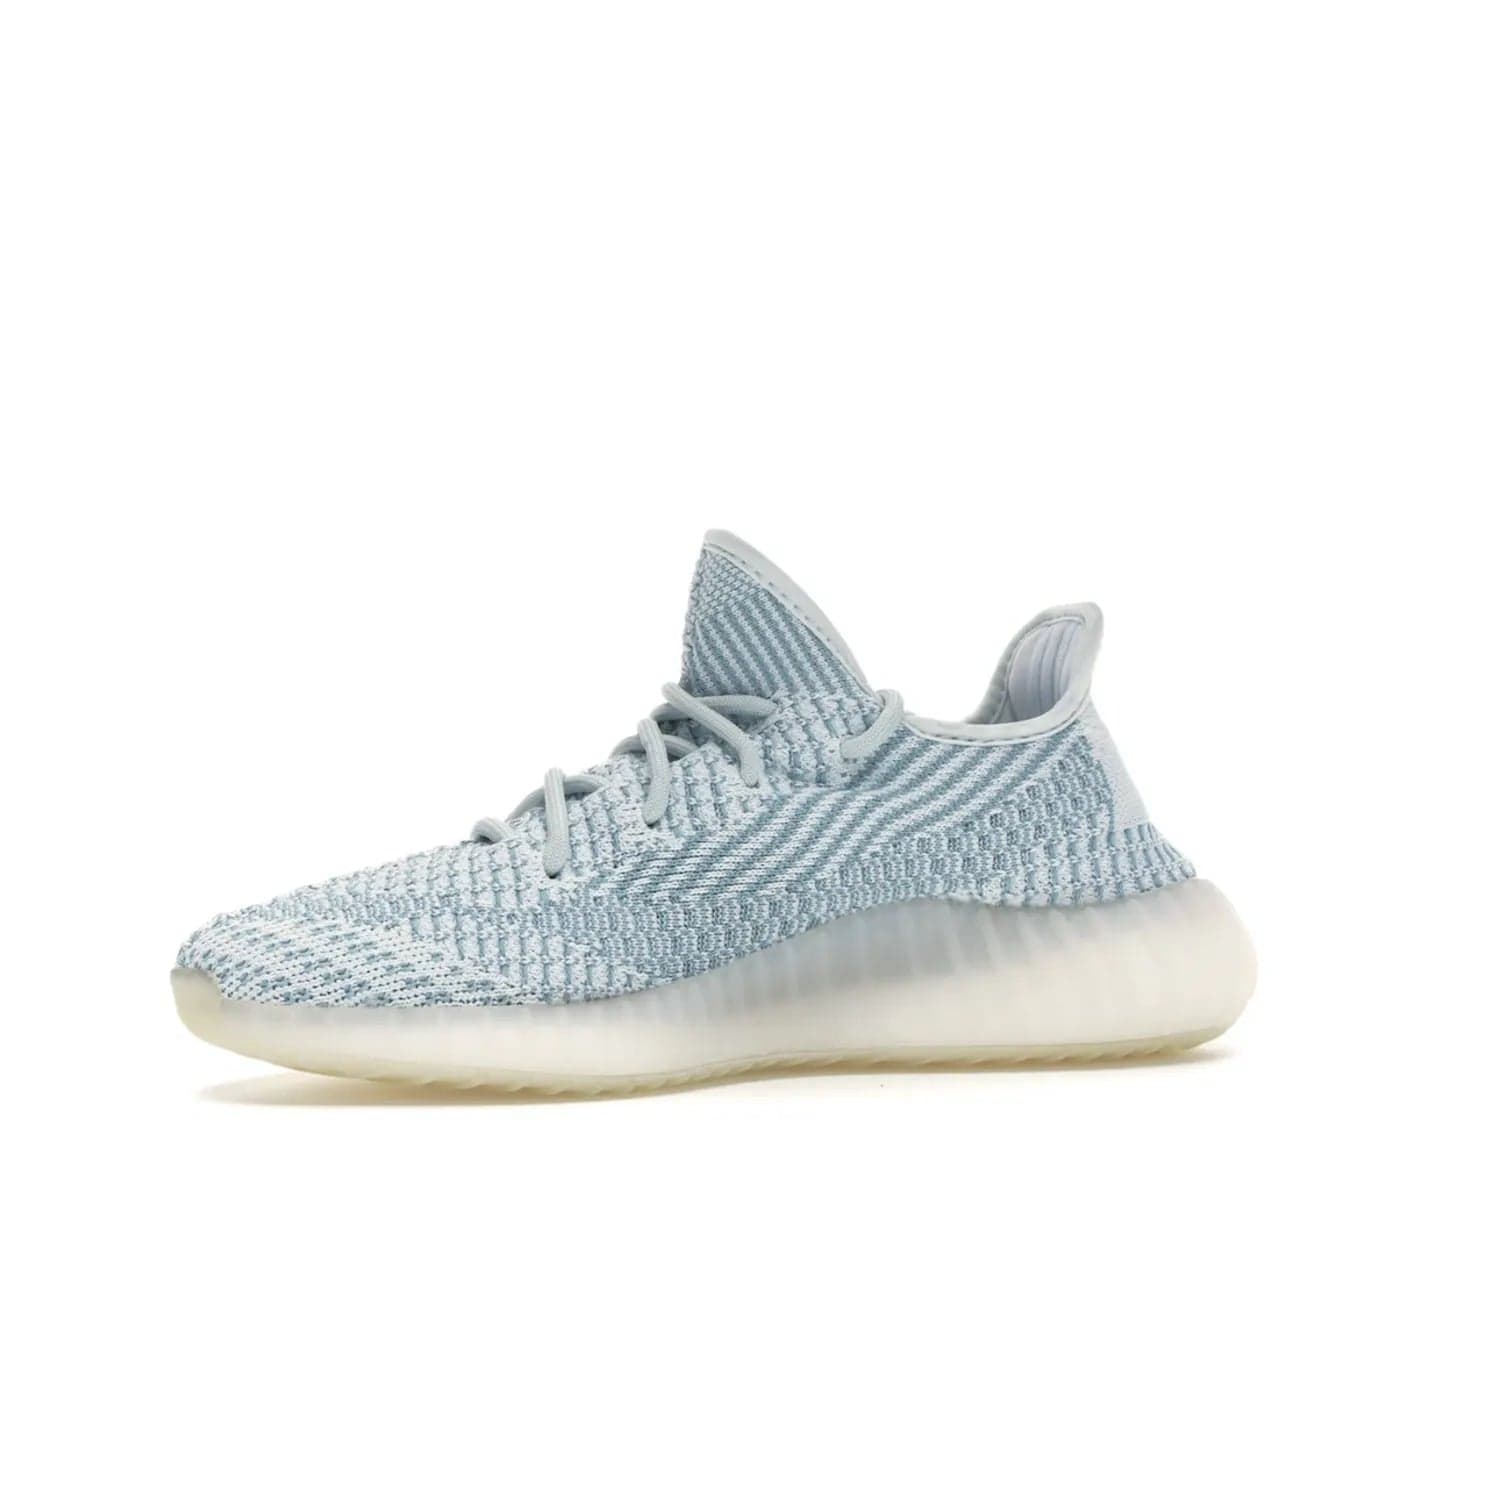 adidas Yeezy Boost 350 V2 Cloud White (Non-Reflective) - Image 17 - Only at www.BallersClubKickz.com - Adidas Yeezy Boost 350 V2 Cloud White (Non-Reflective) features Primeknit fabric and a unique, eye-catching design of cream, bluish-white, and transparent strip. Step out in timeless style with this eye-catching sneaker.